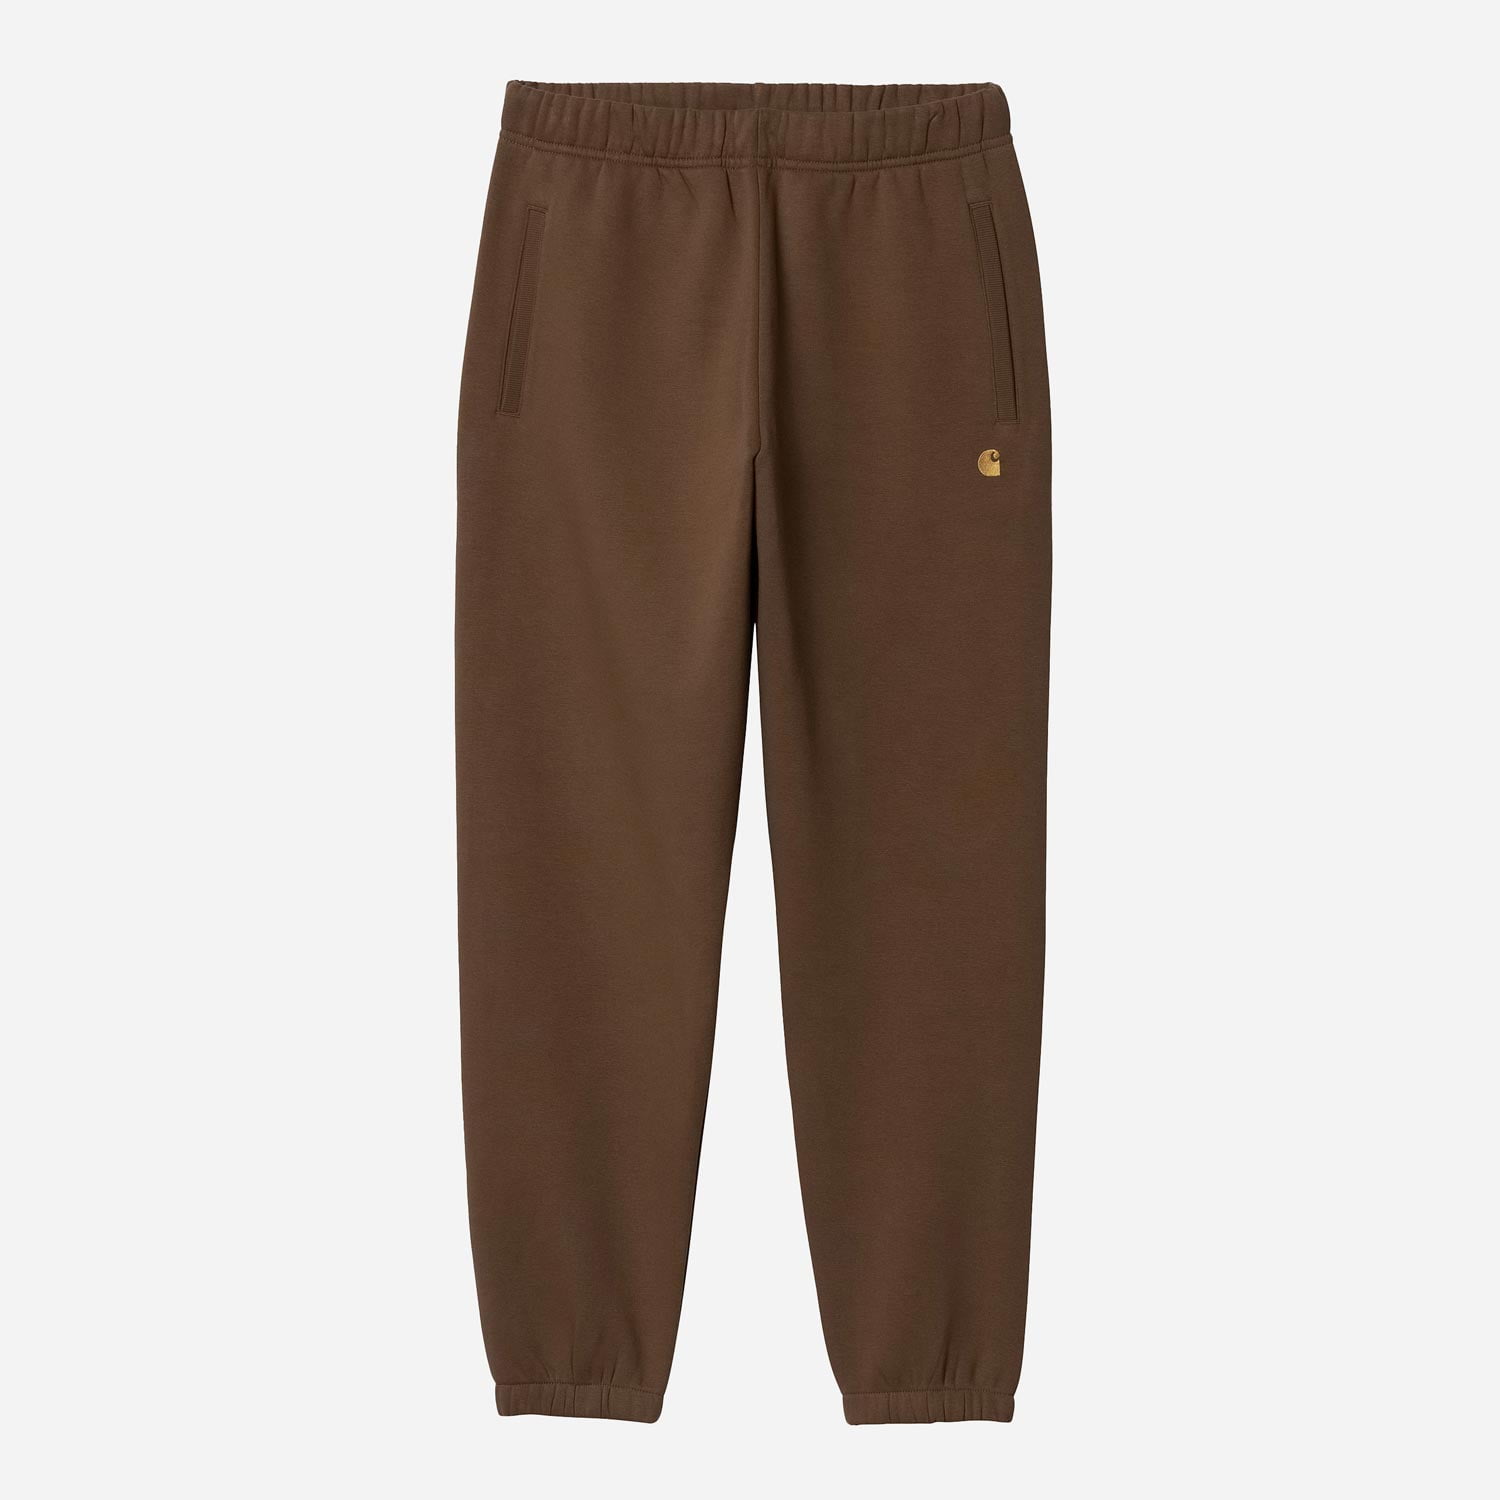 Carhartt WIP Chase Loose Fit Sweat Pant - Tamarind/Gold